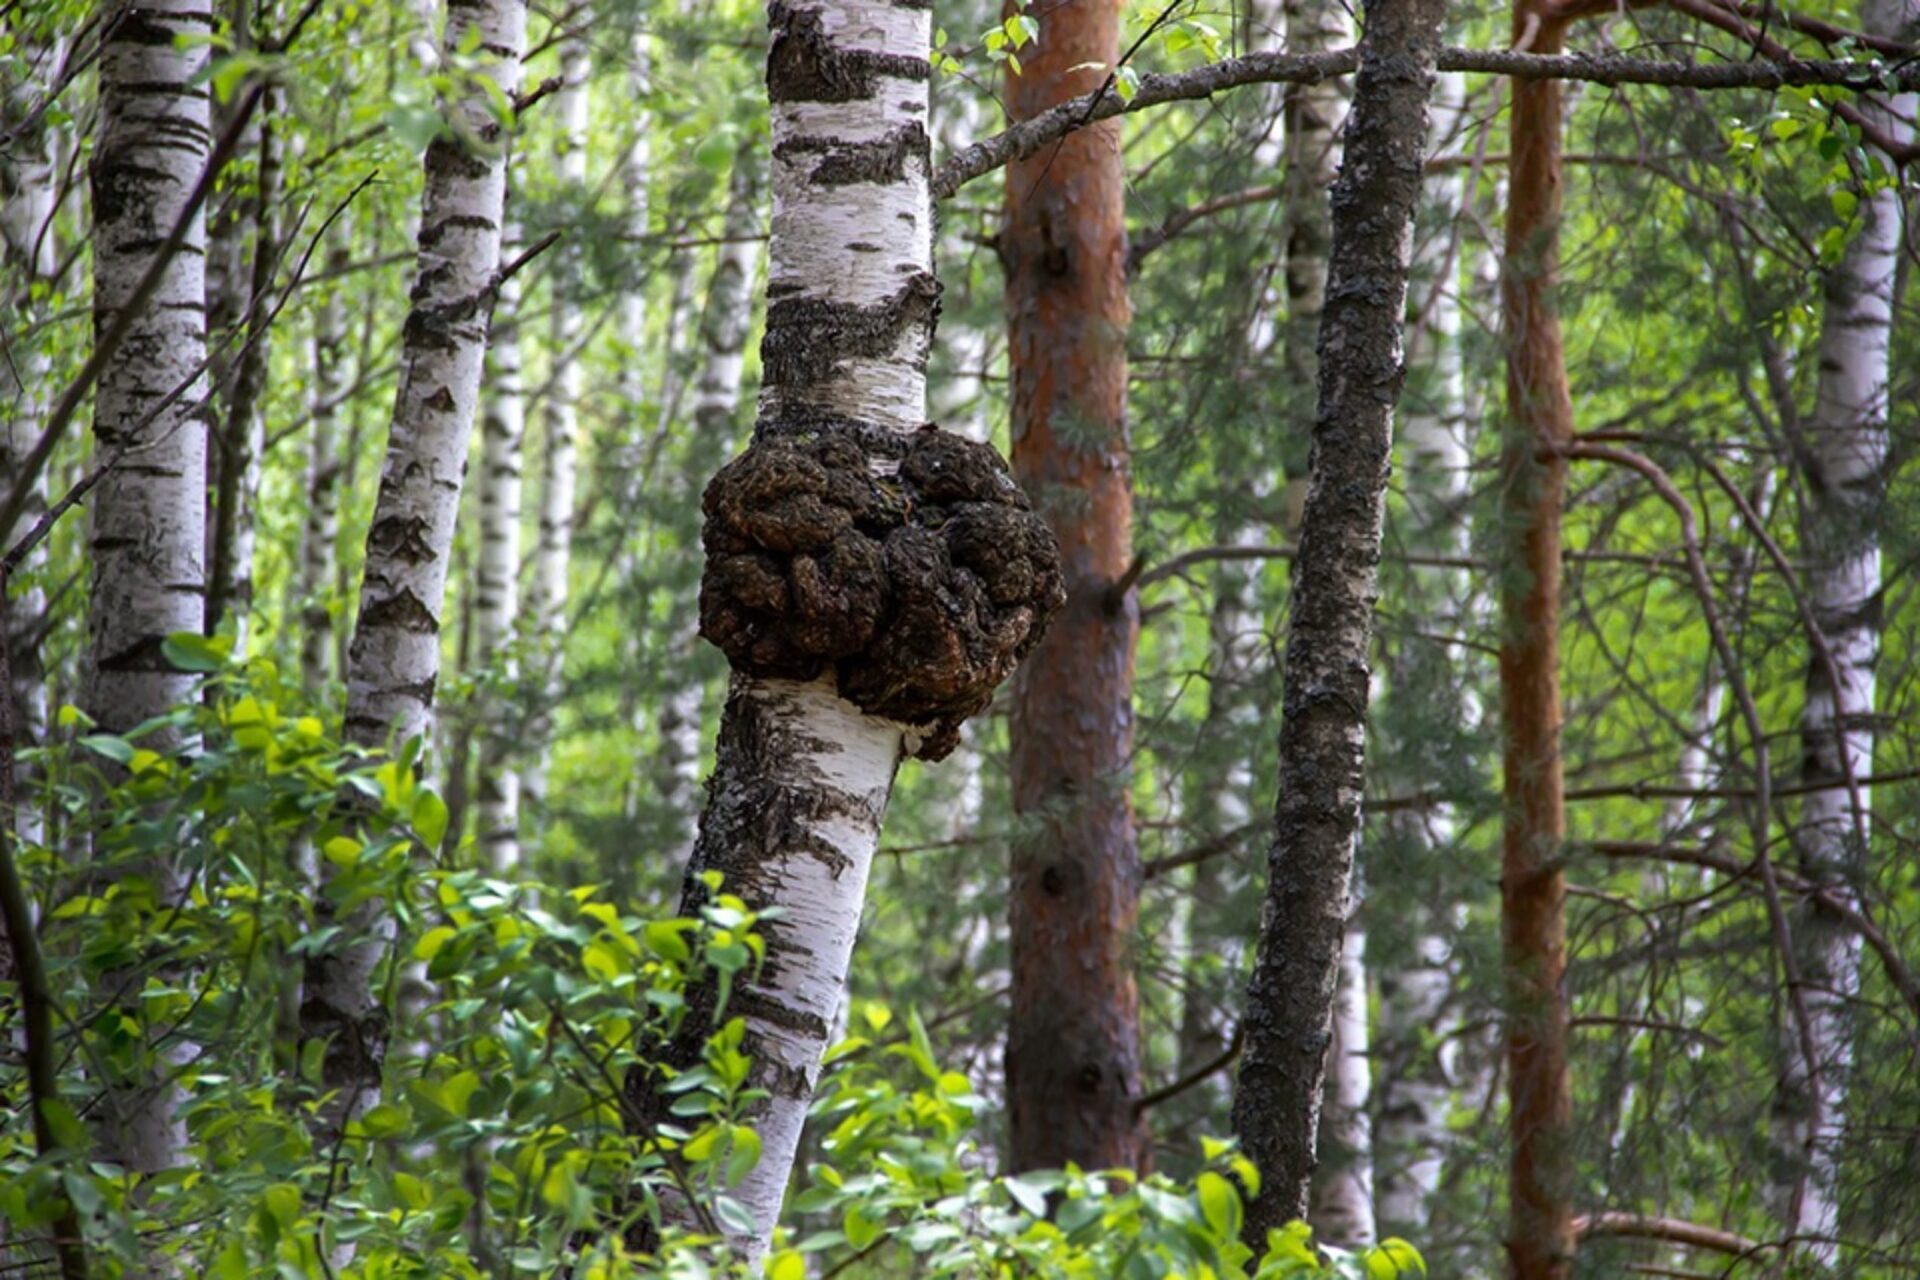 Large growth of chaga on tree trunk